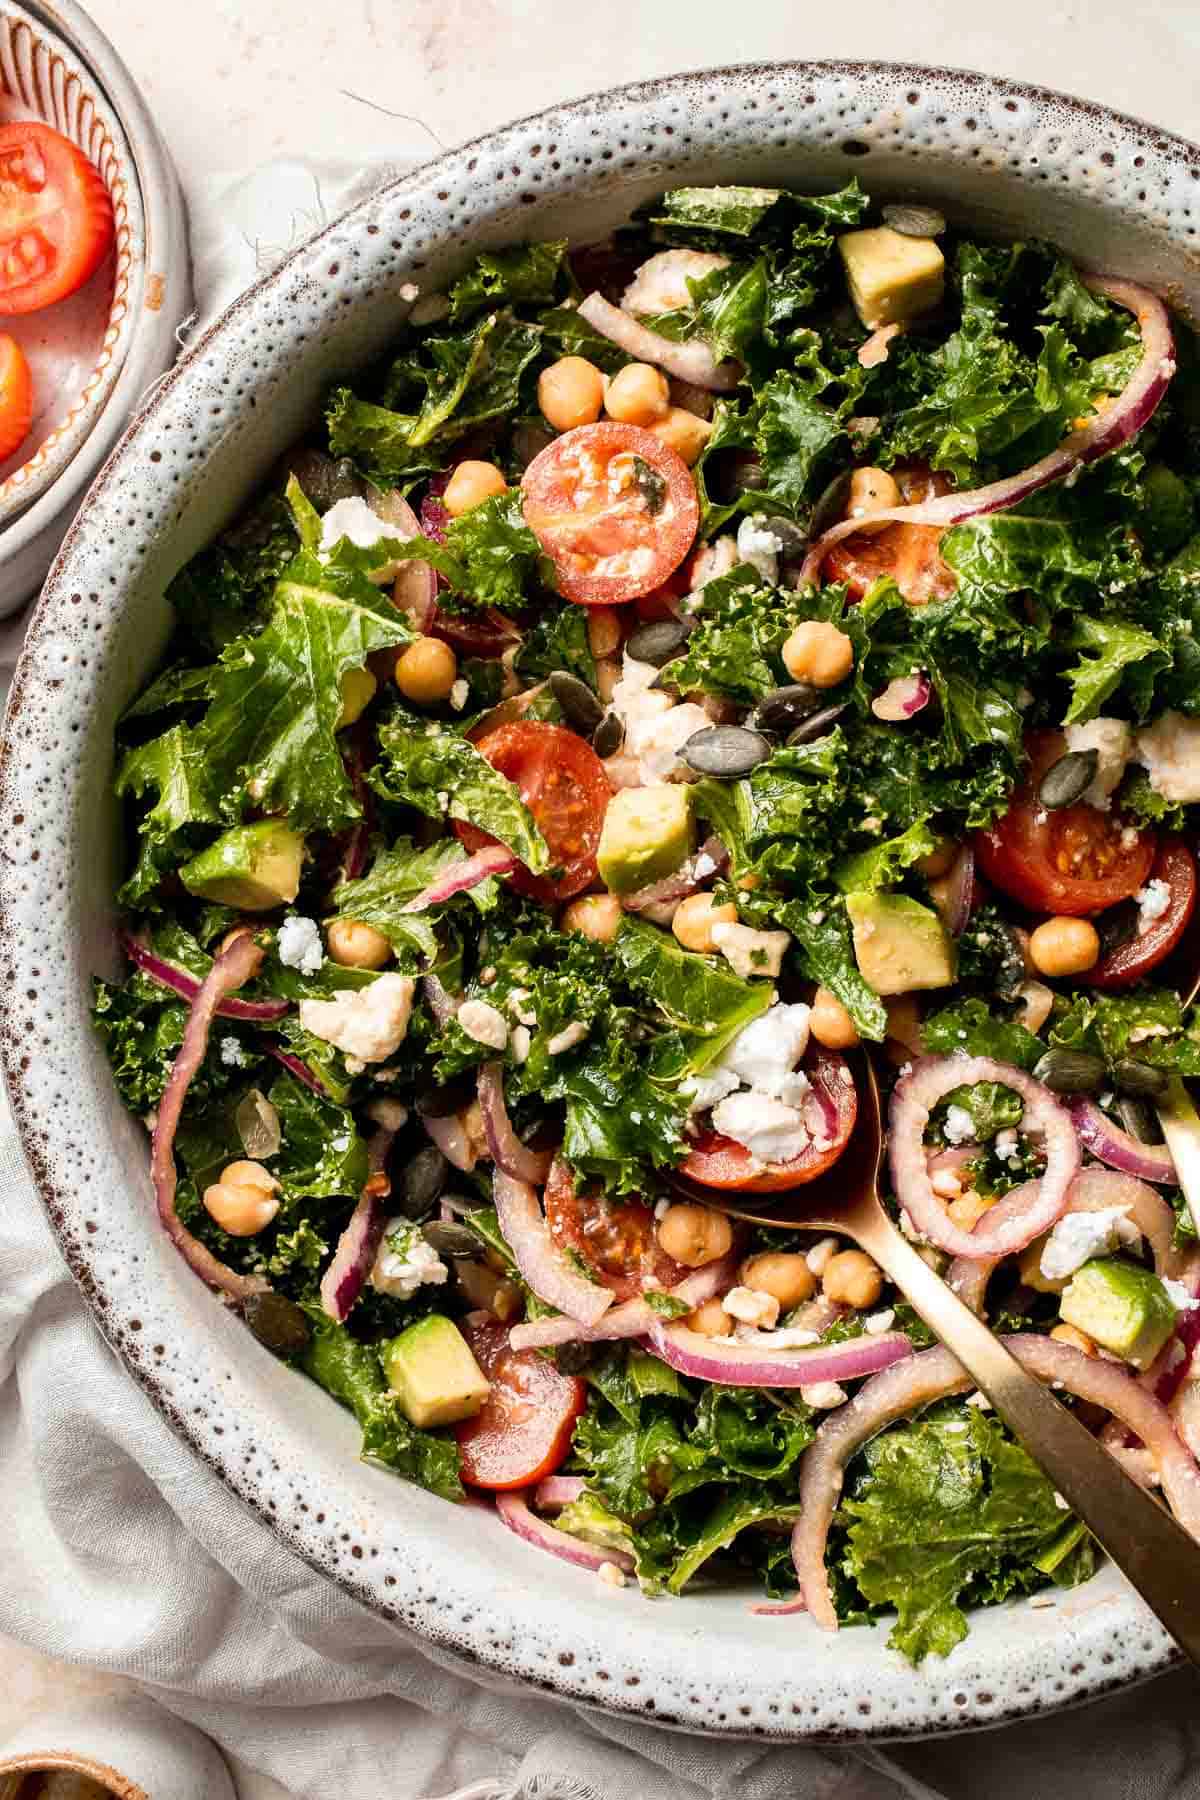 This Kale Chickpea Salad is light and refreshing, made with a mixture of fresh veggies, chickpeas, tangy feta, and a homemade lemon dijon vinaigrette. | aheadofthyme.com